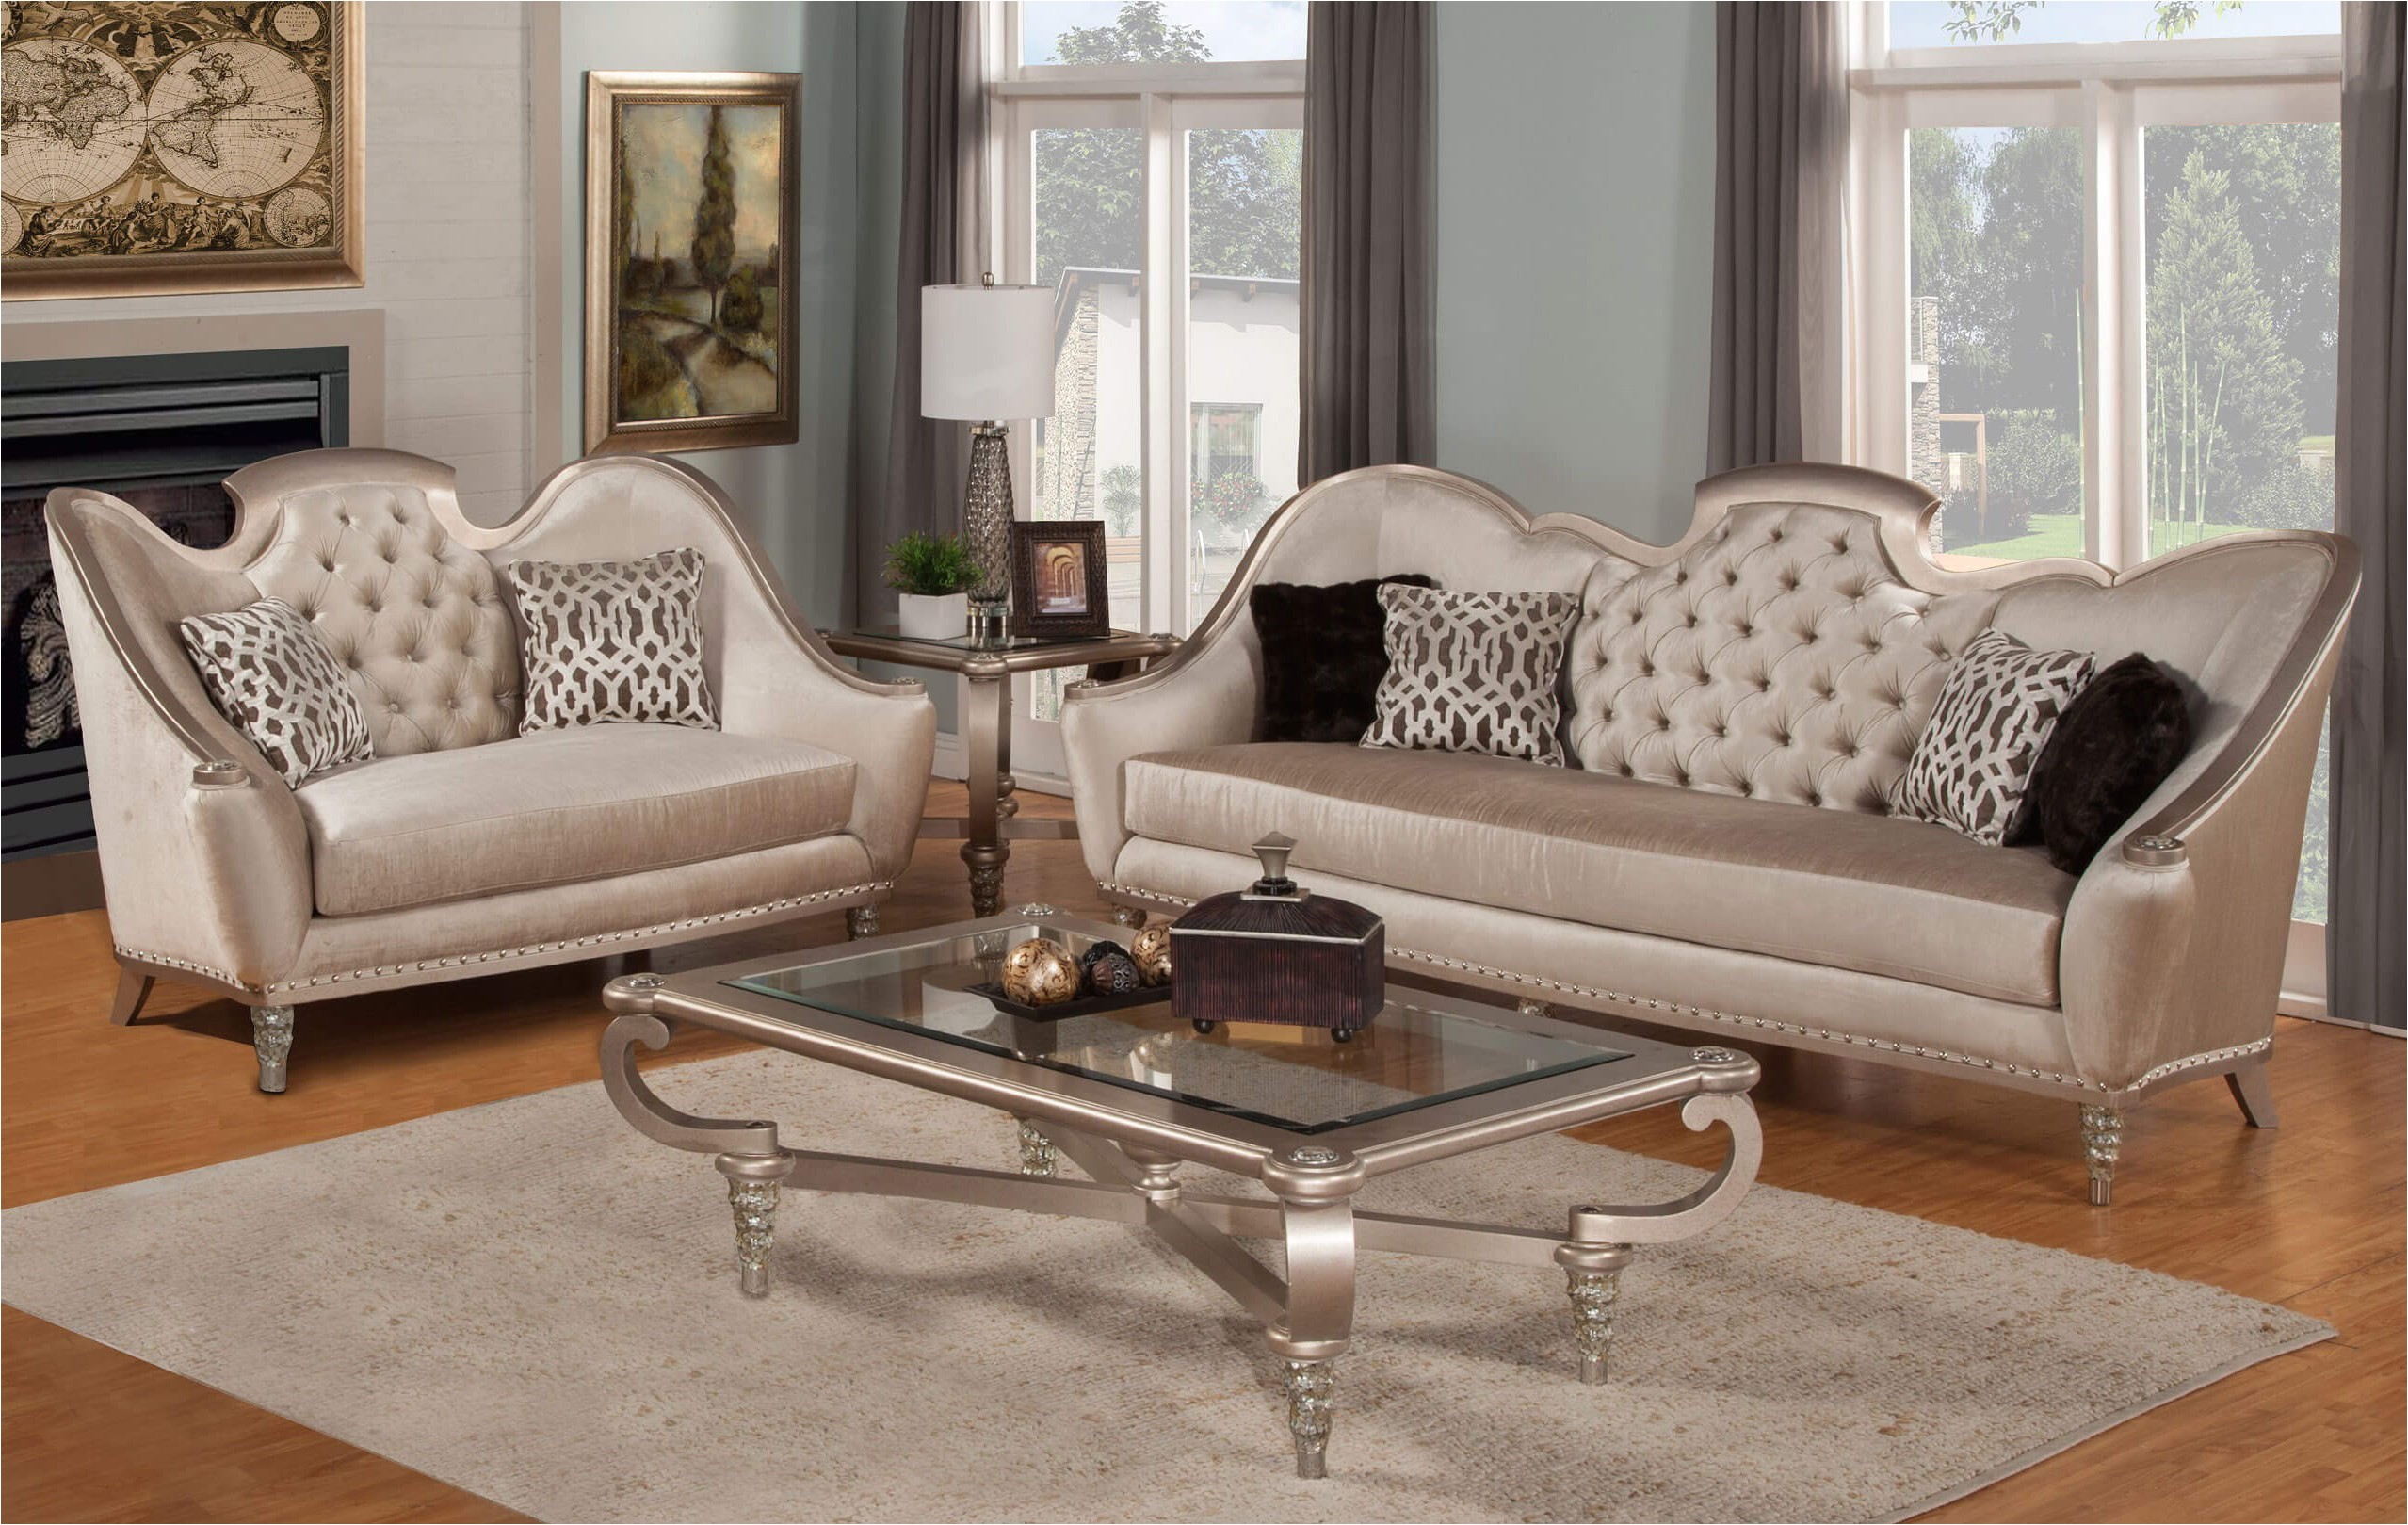 full size of striking sofia vergara sofa collection images design canada sofas sectionals stunning yet luxurious